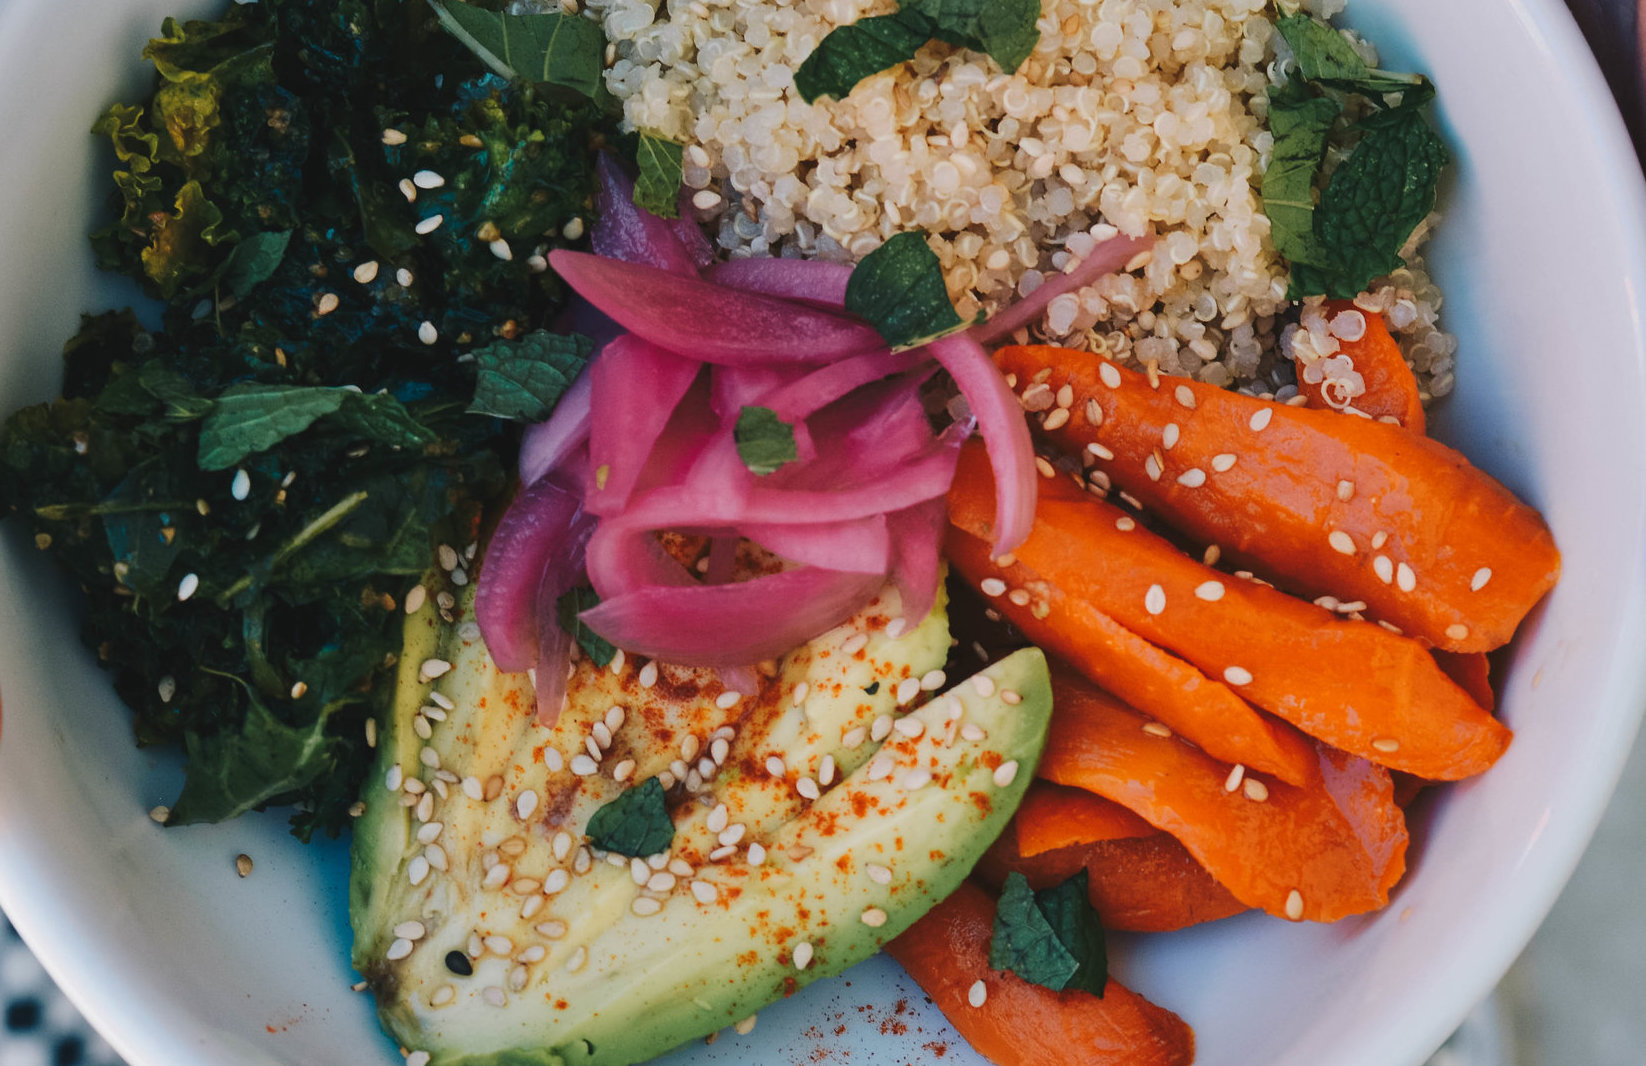 Healthy Lunch bowl with kale, carrots, quinoa from OTL cafe at the Design District